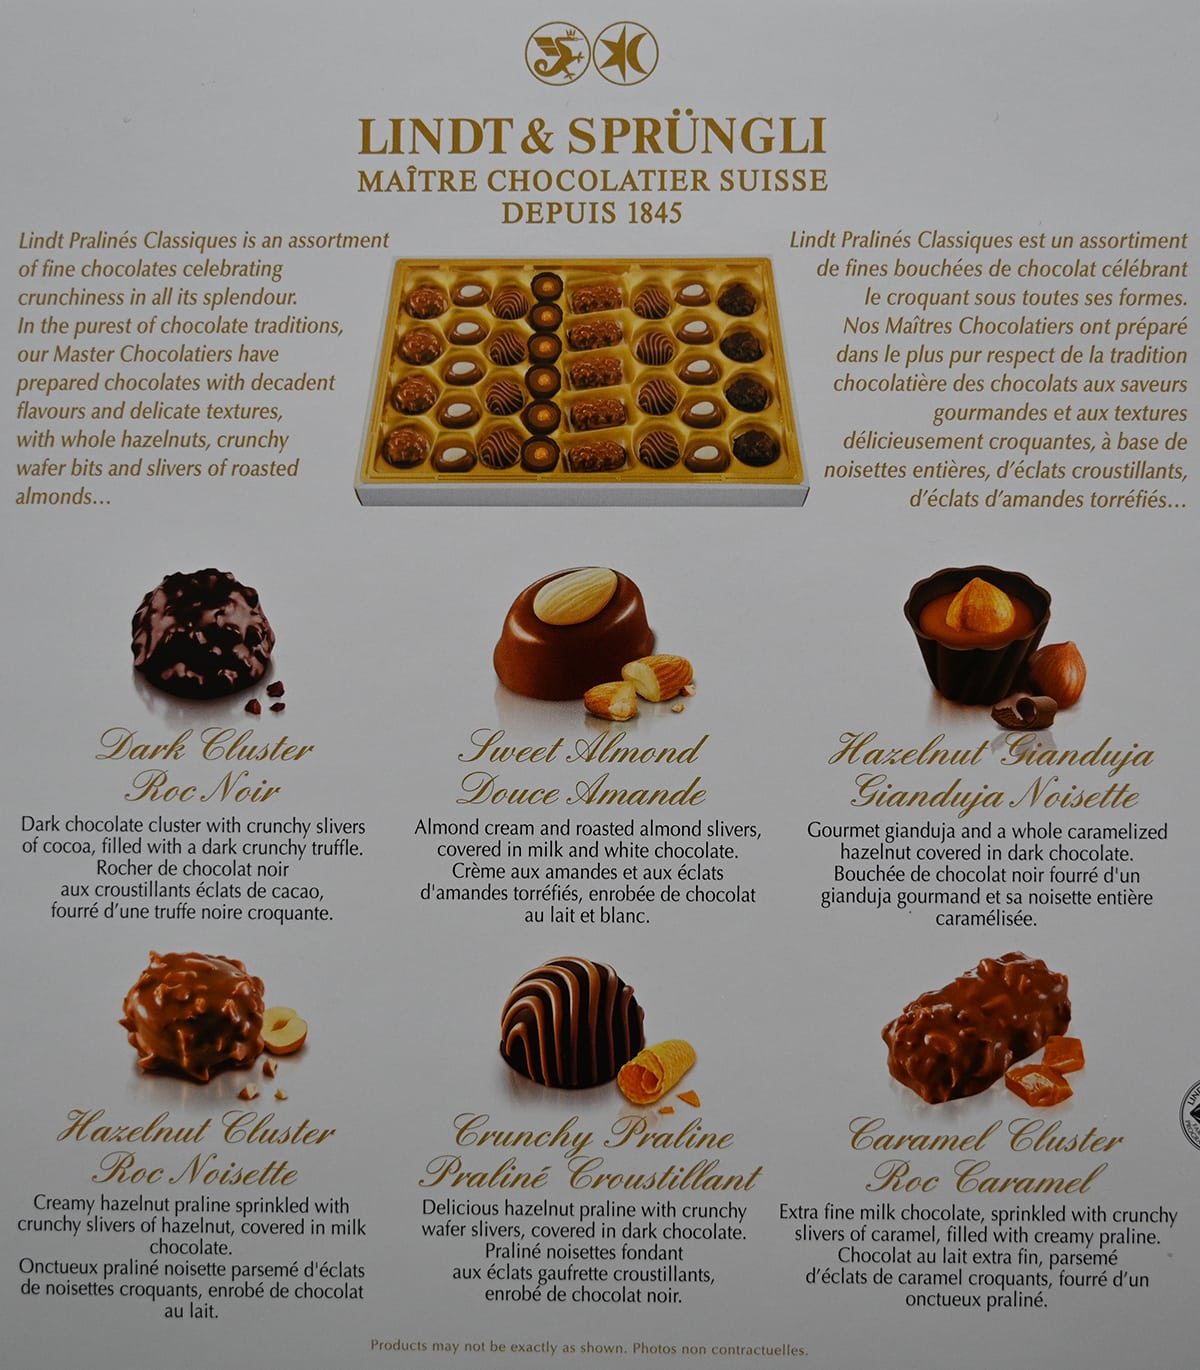 Image of the back of the box of chocolates showing the different chocolates that come in the box as well as a product description.